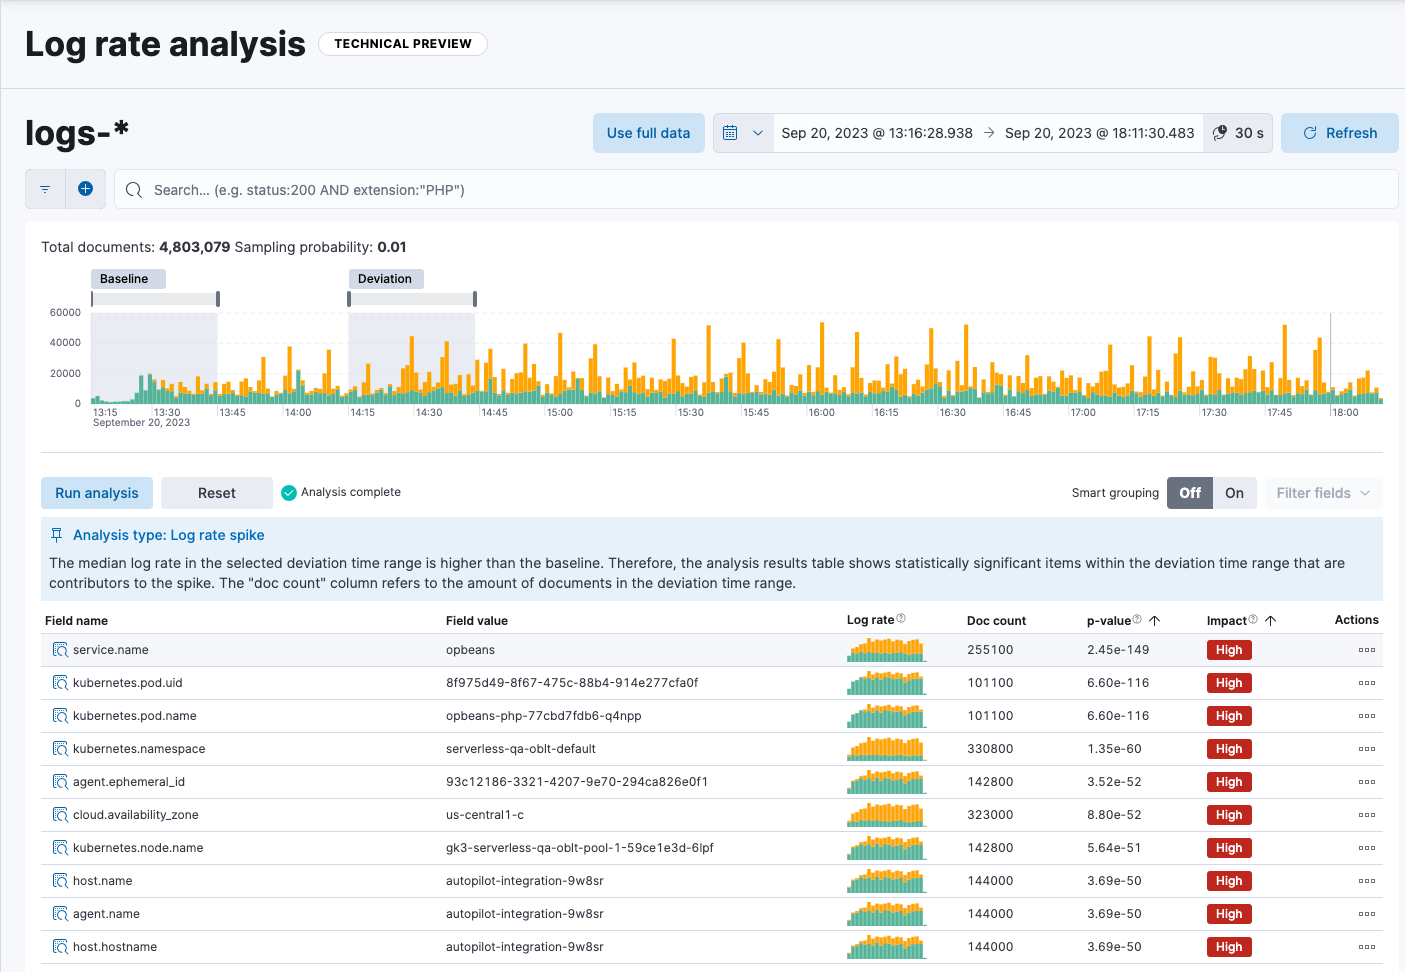 Log rate analysis page showing log rate spike 